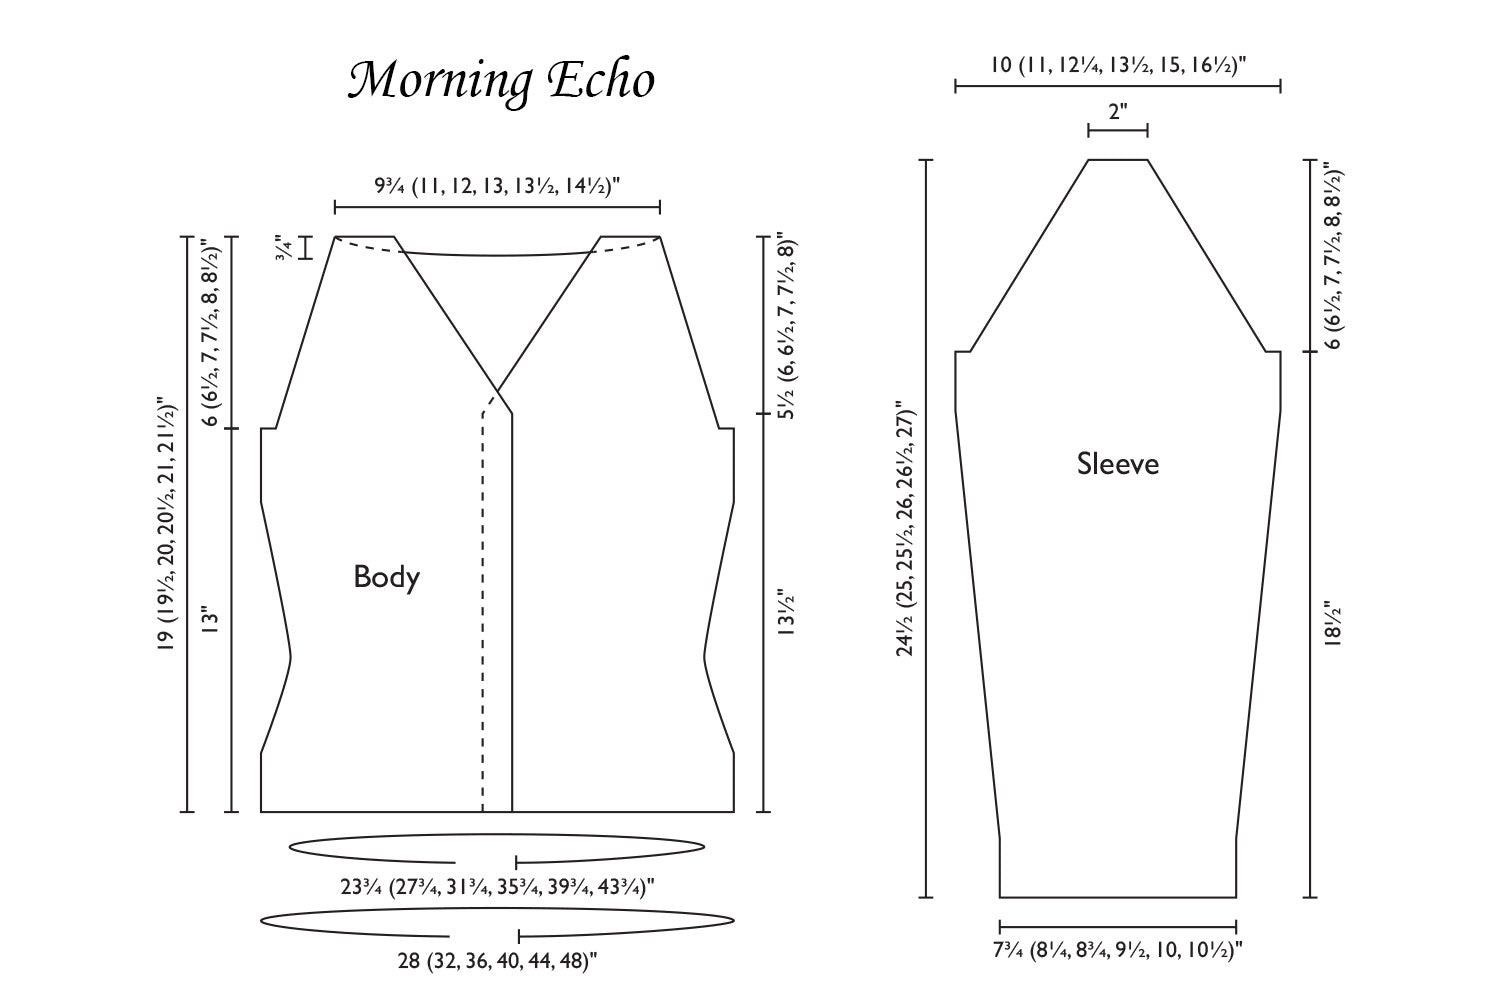 Detailed schematic line drawing with dimensions for Morning Echo cardigan